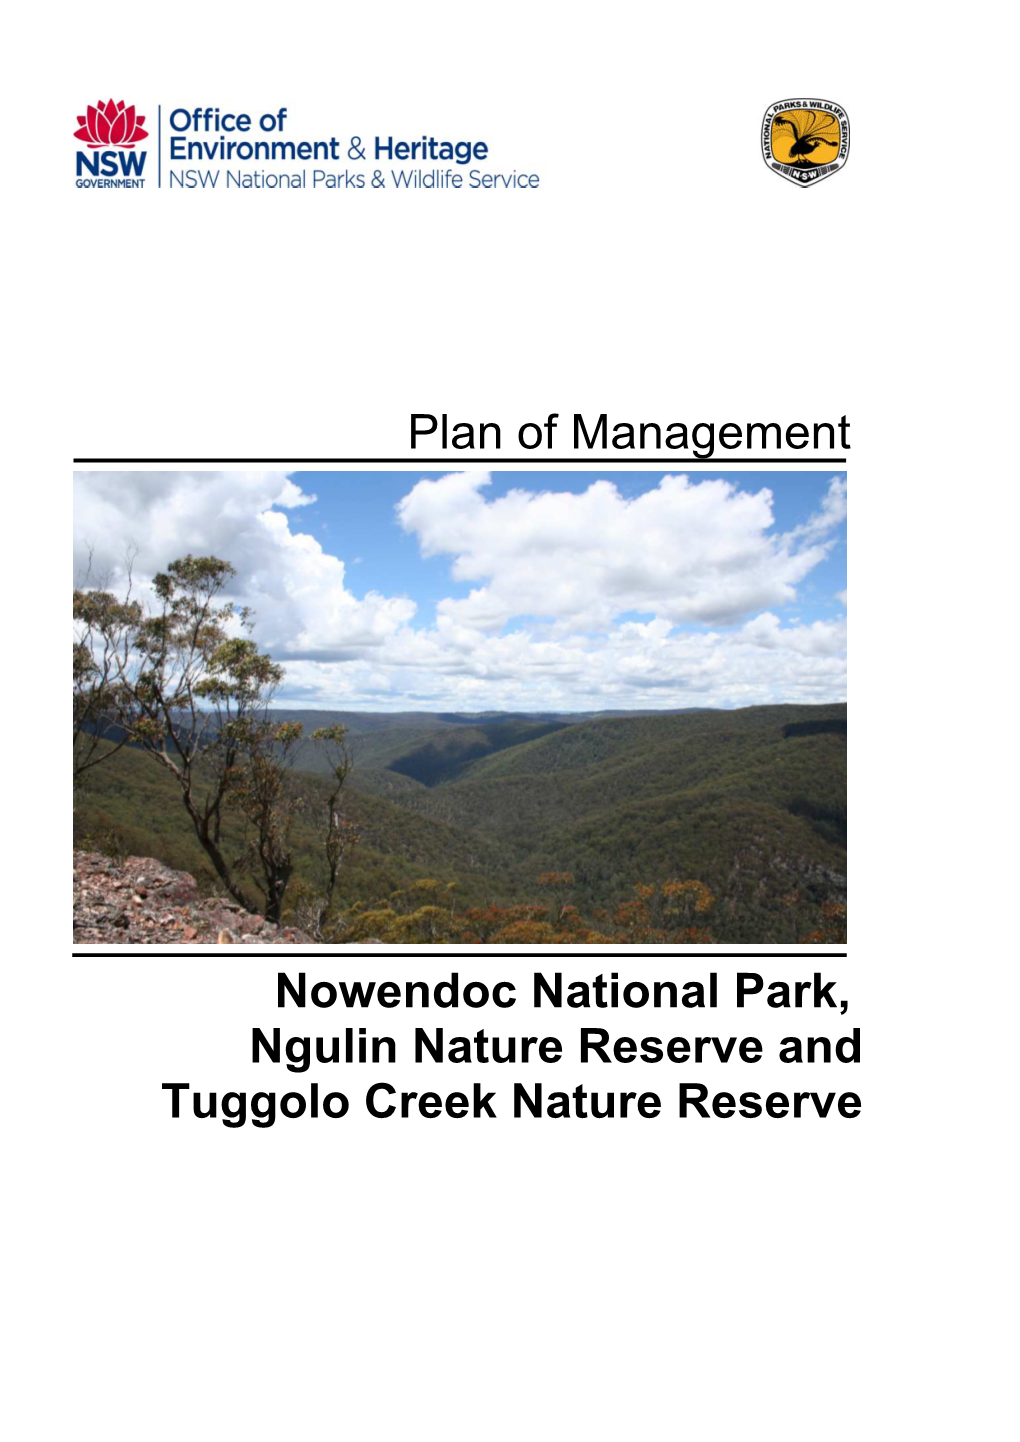 Nowendoc National Park, Ngulin Nature Reserve and Tuggolo Creek Nature Reserve